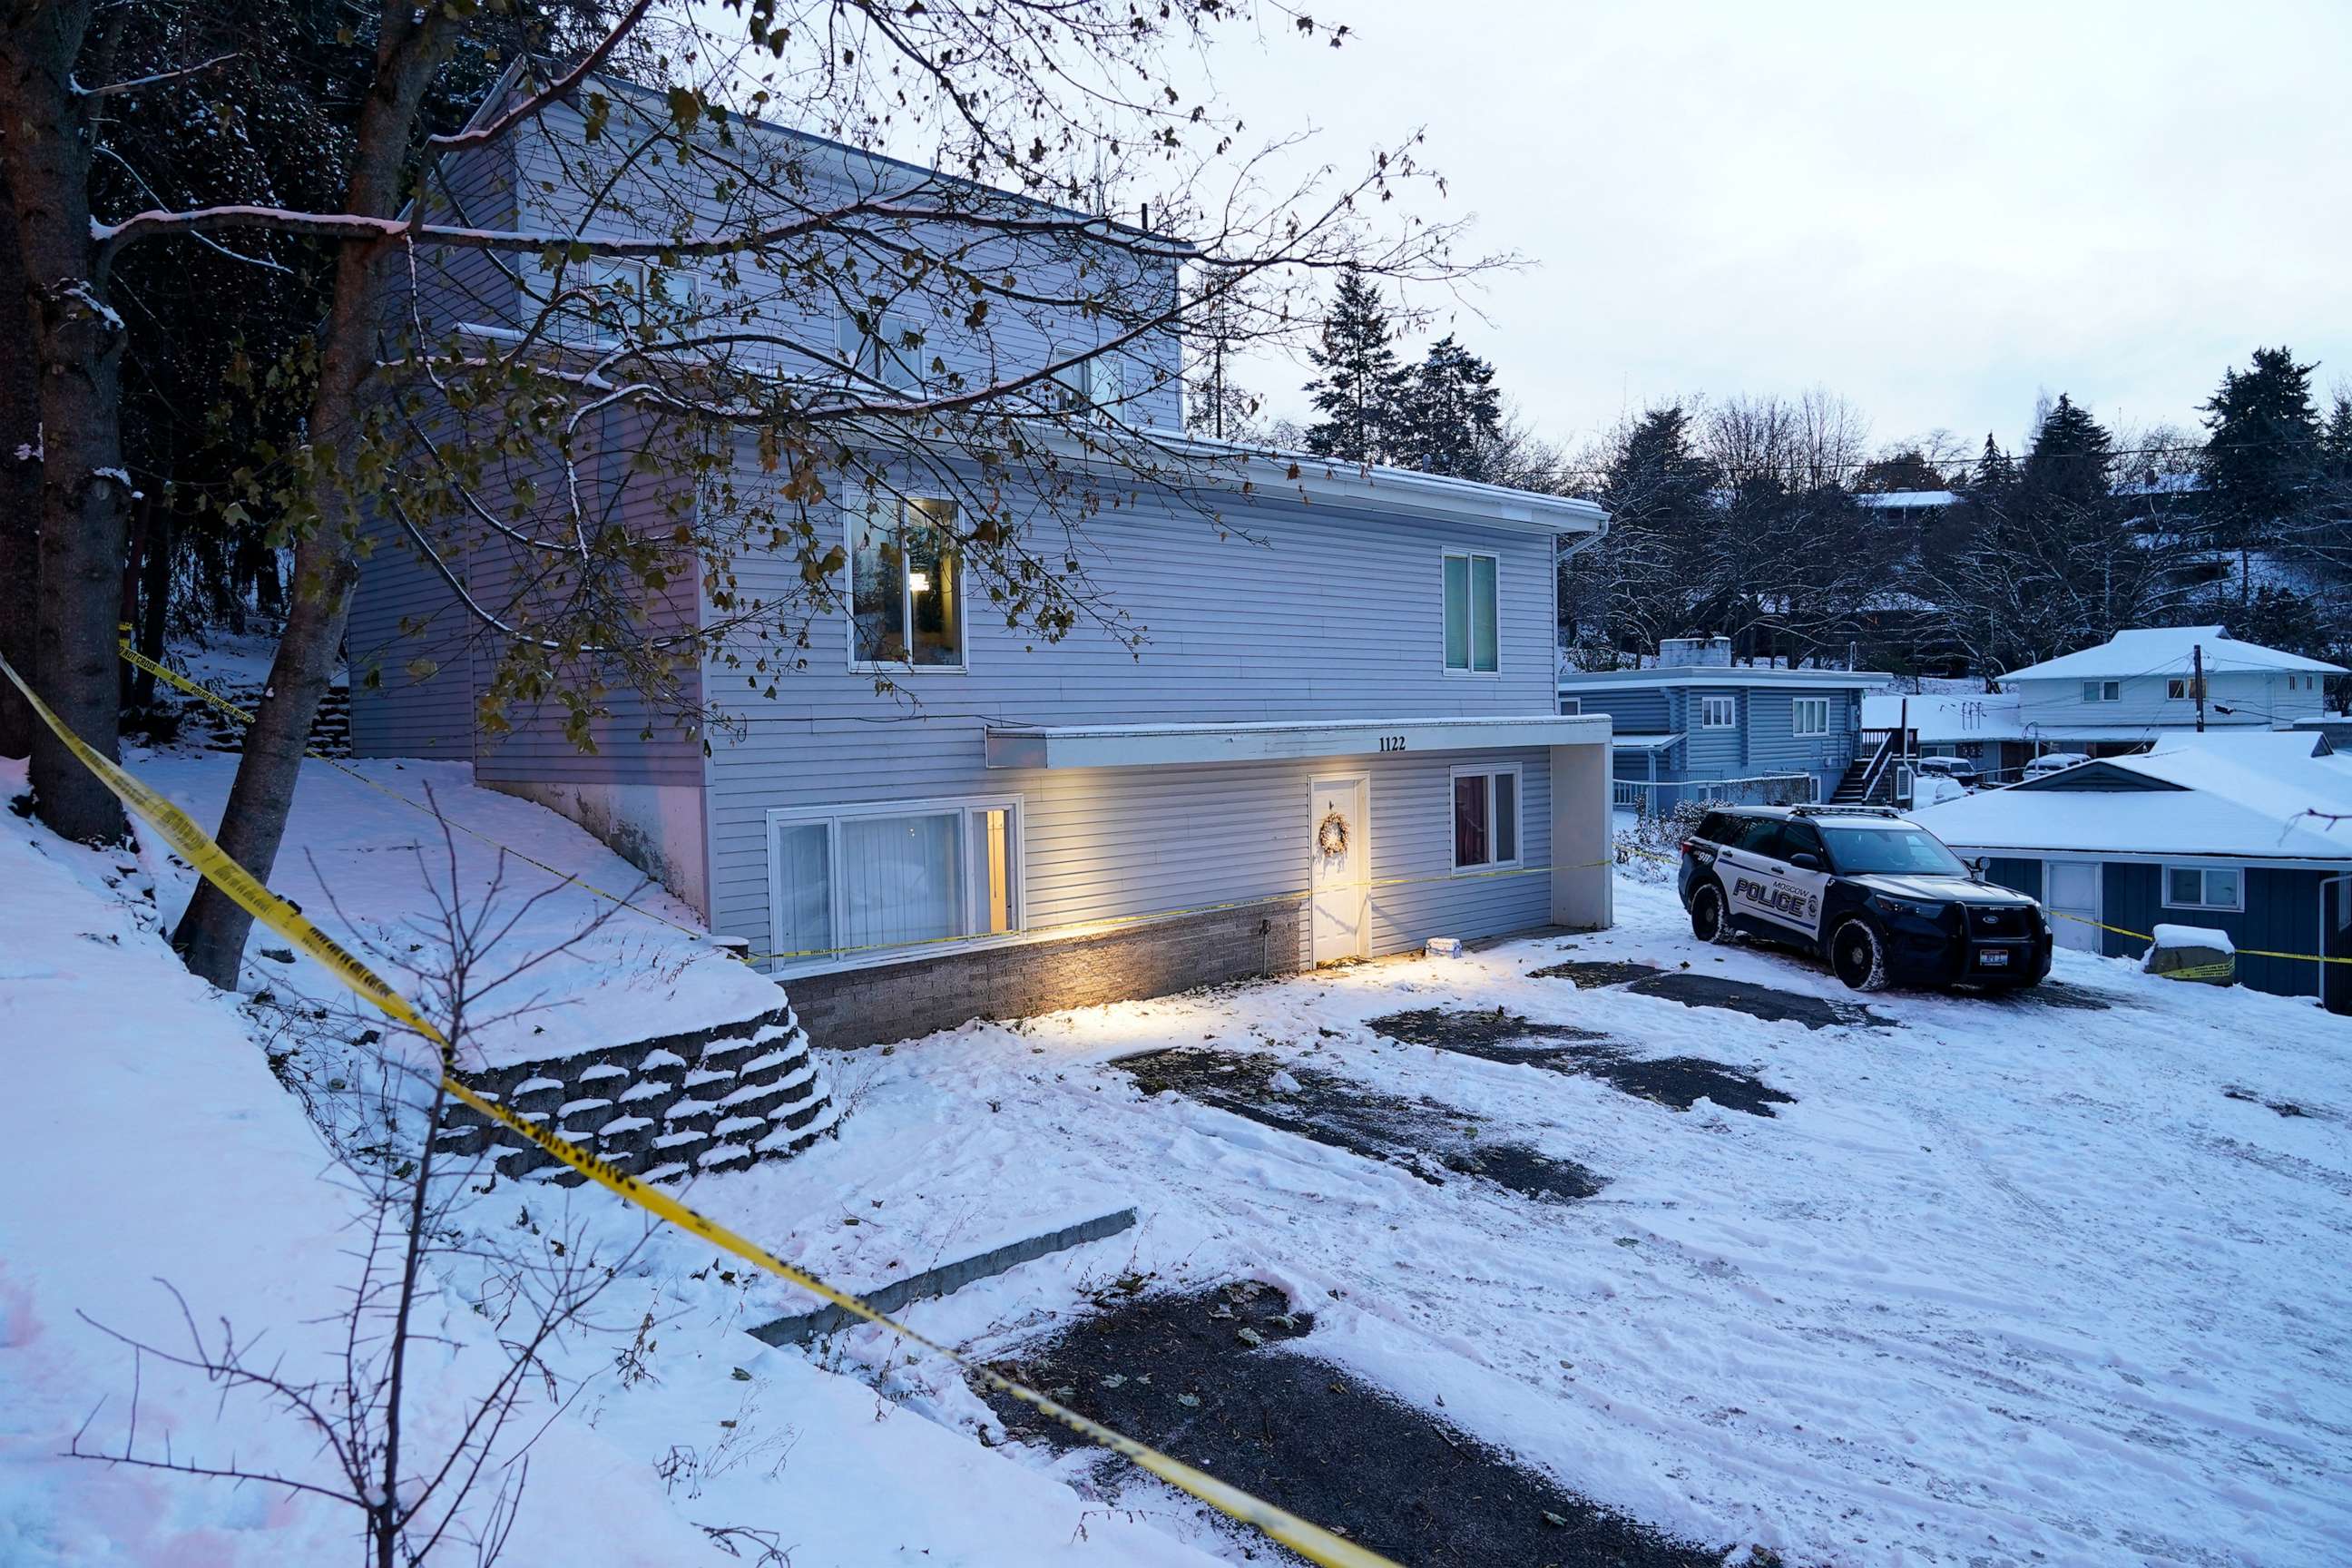 PHOTO: Bare spots are seen, Nov. 29, 2022, in the snowy parking lot in front of the home where four University of Idaho students were found dead on Nov. 13, in Moscow, Idaho.